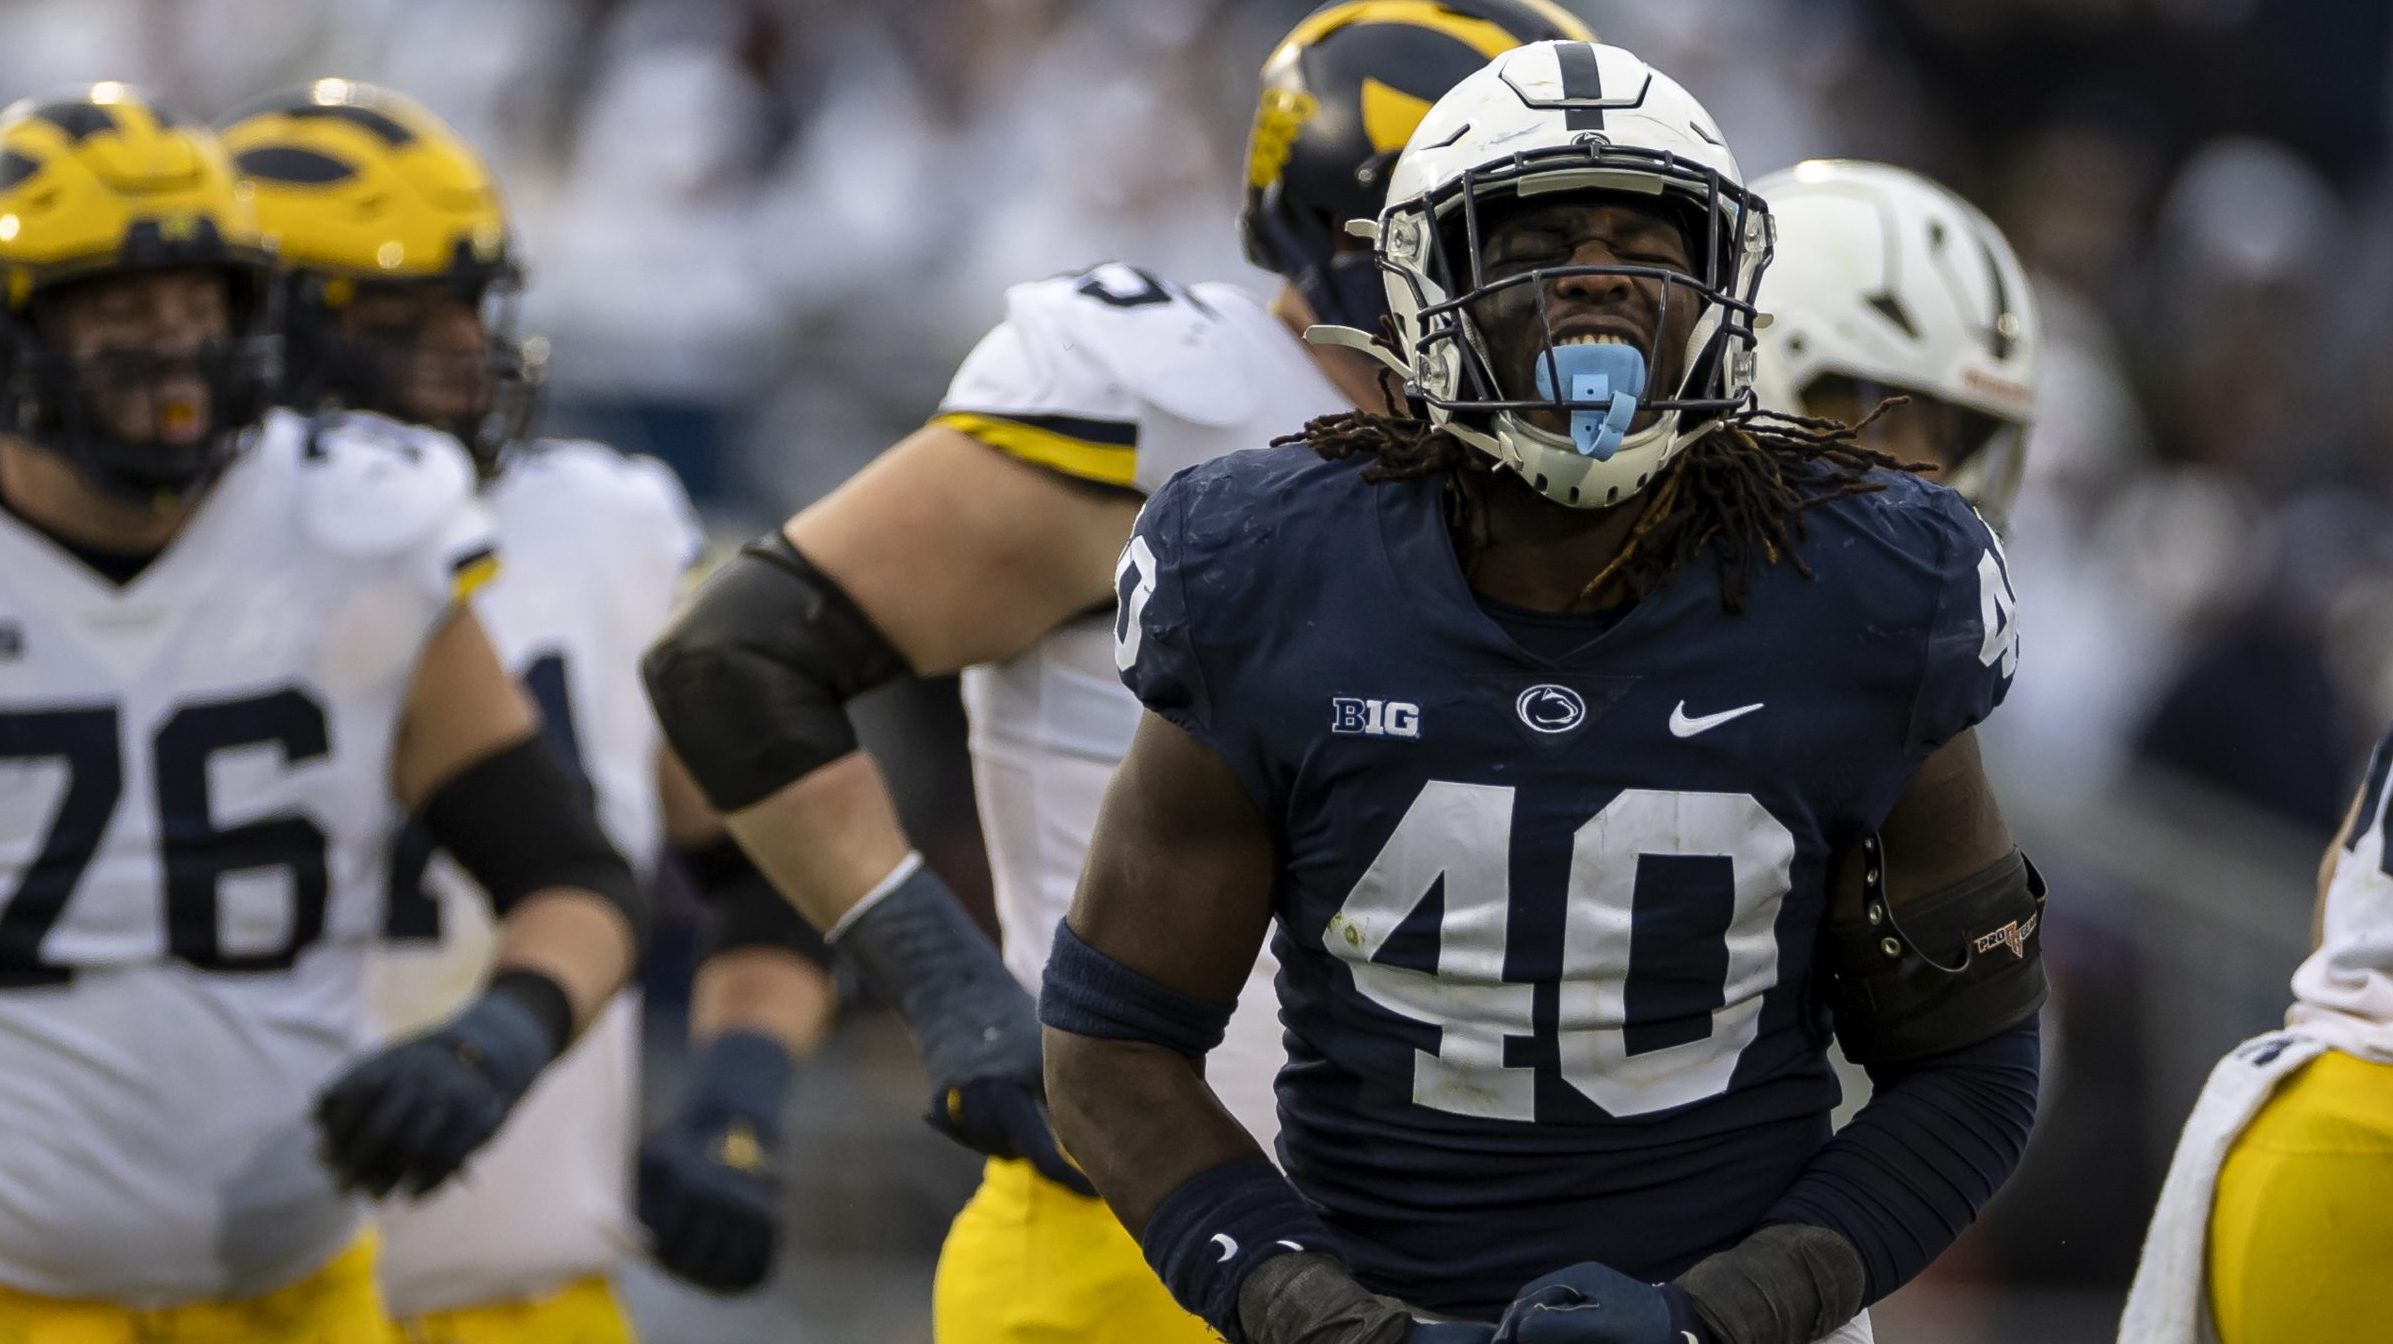 Jesse Luketa #40 of the Penn State Nittany Lions celebrates after a play against the Michigan Wolve...